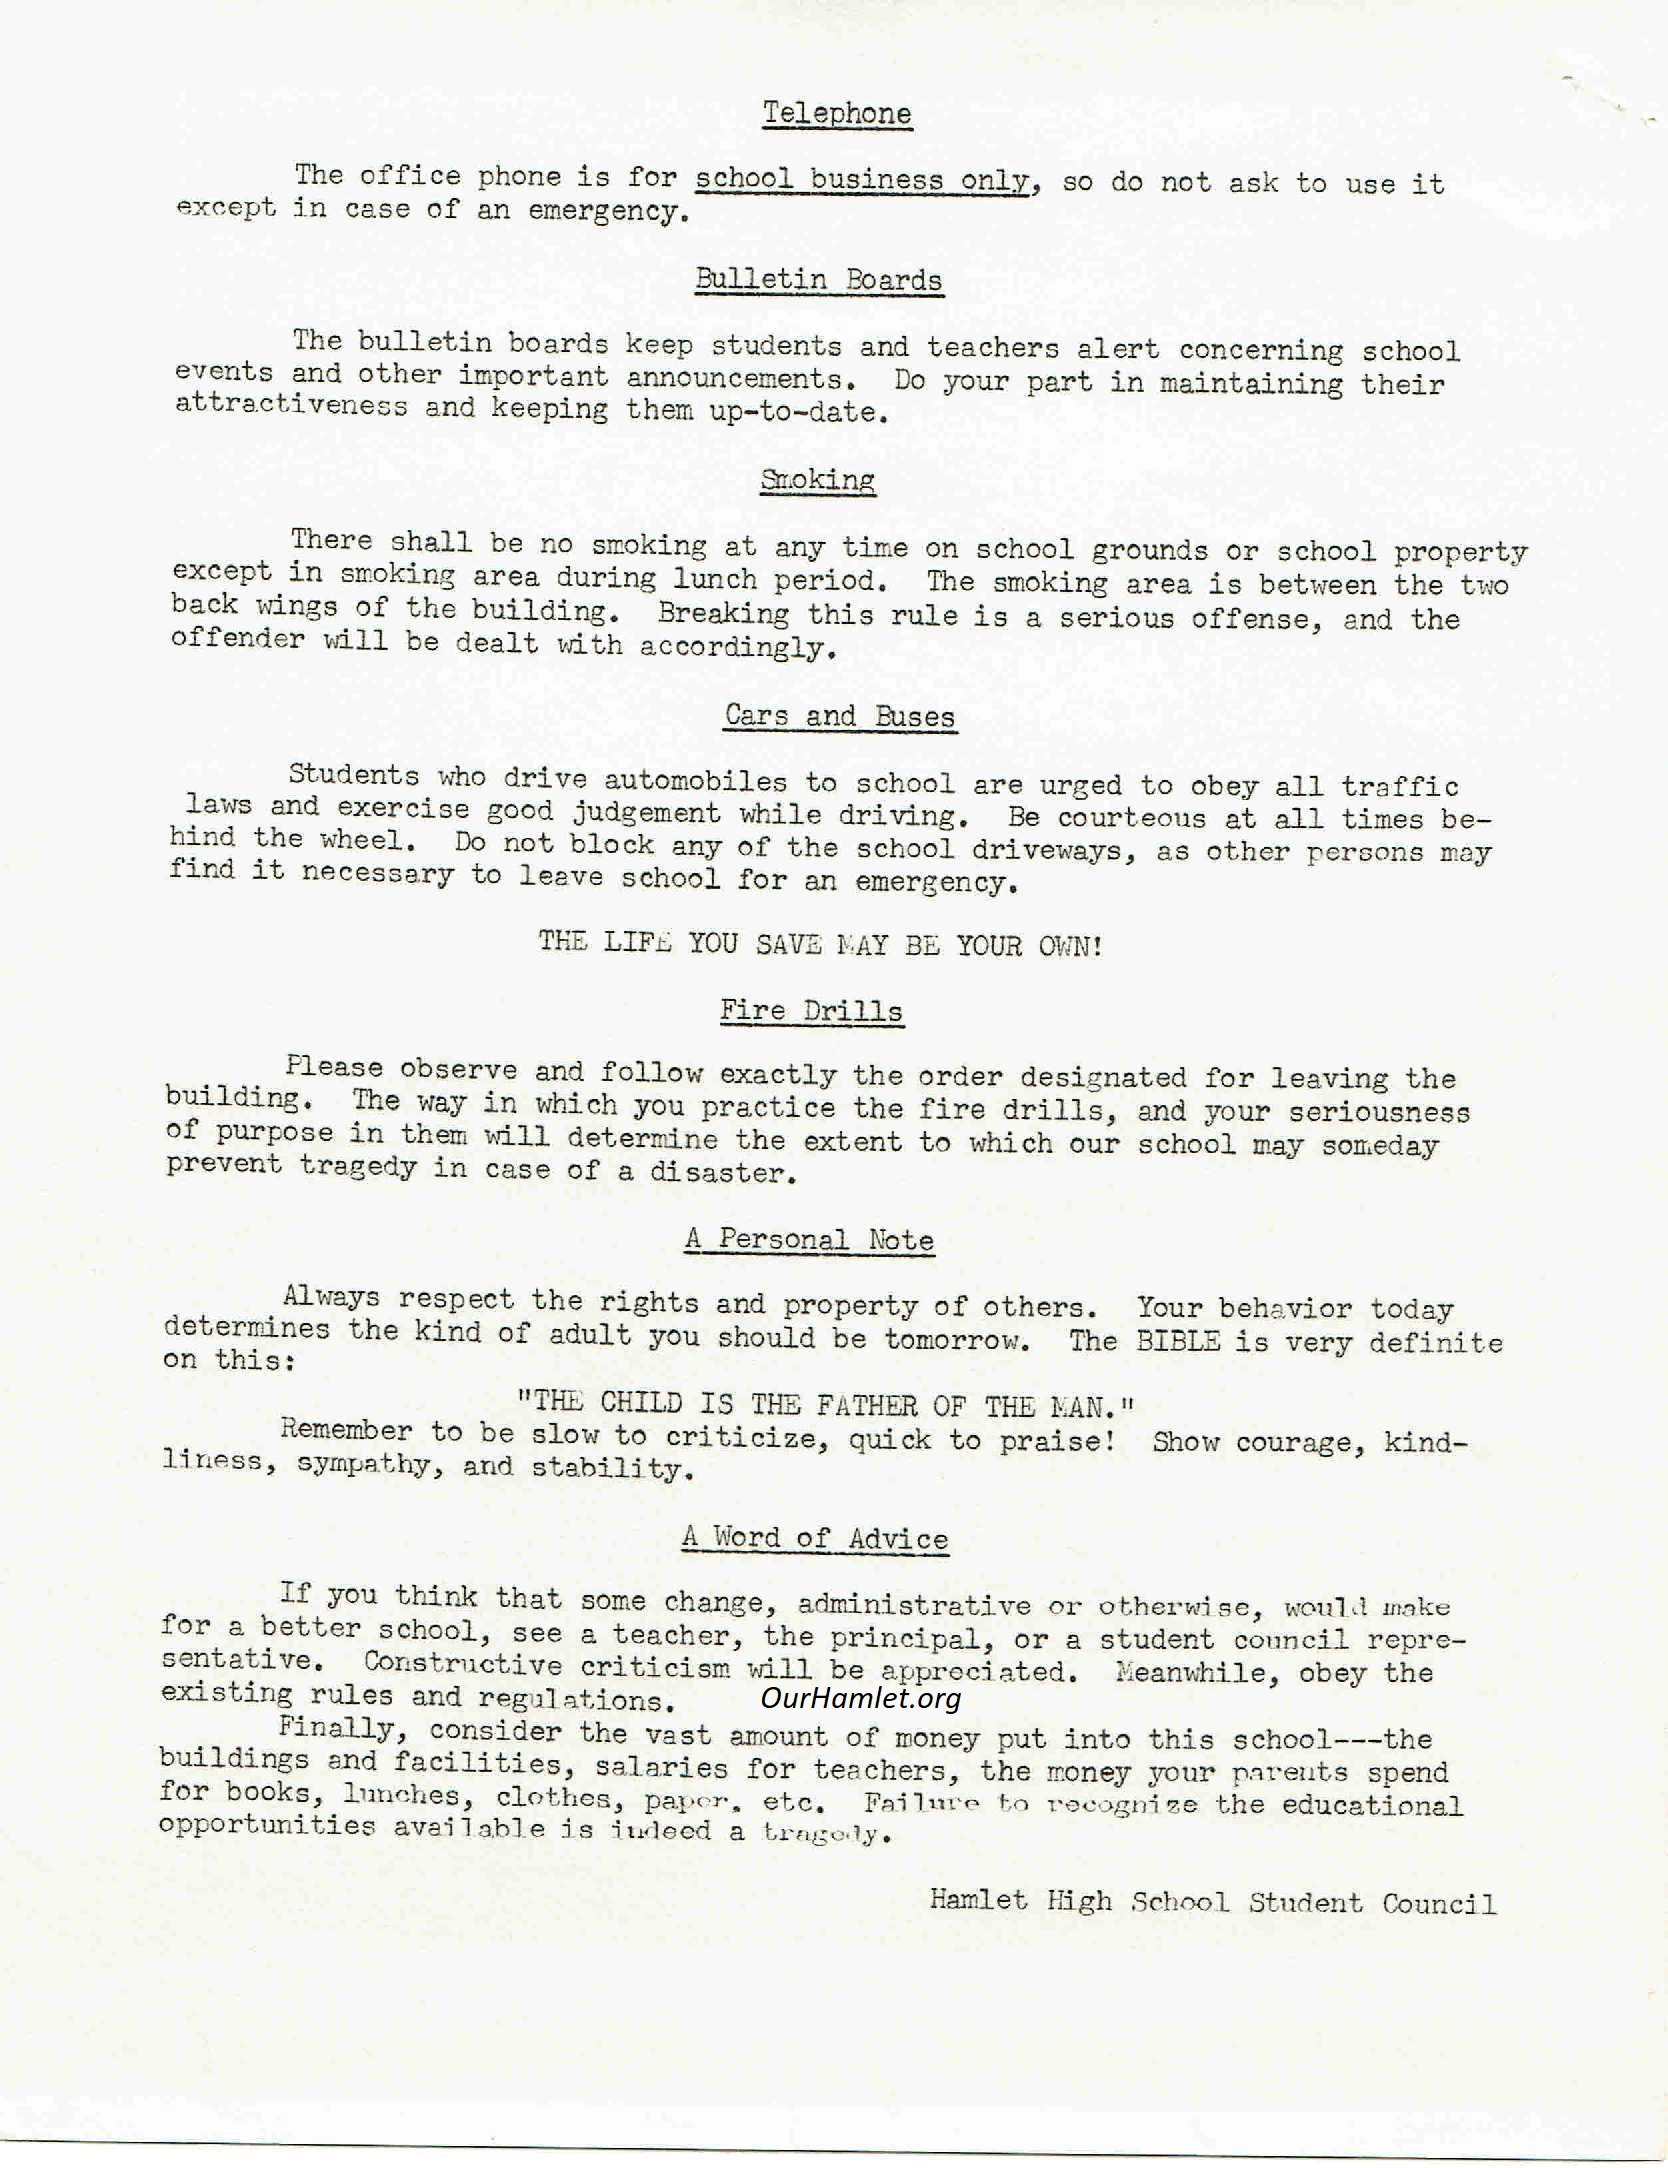 HHS Rules and Procedures 1968_4 OH.jpg